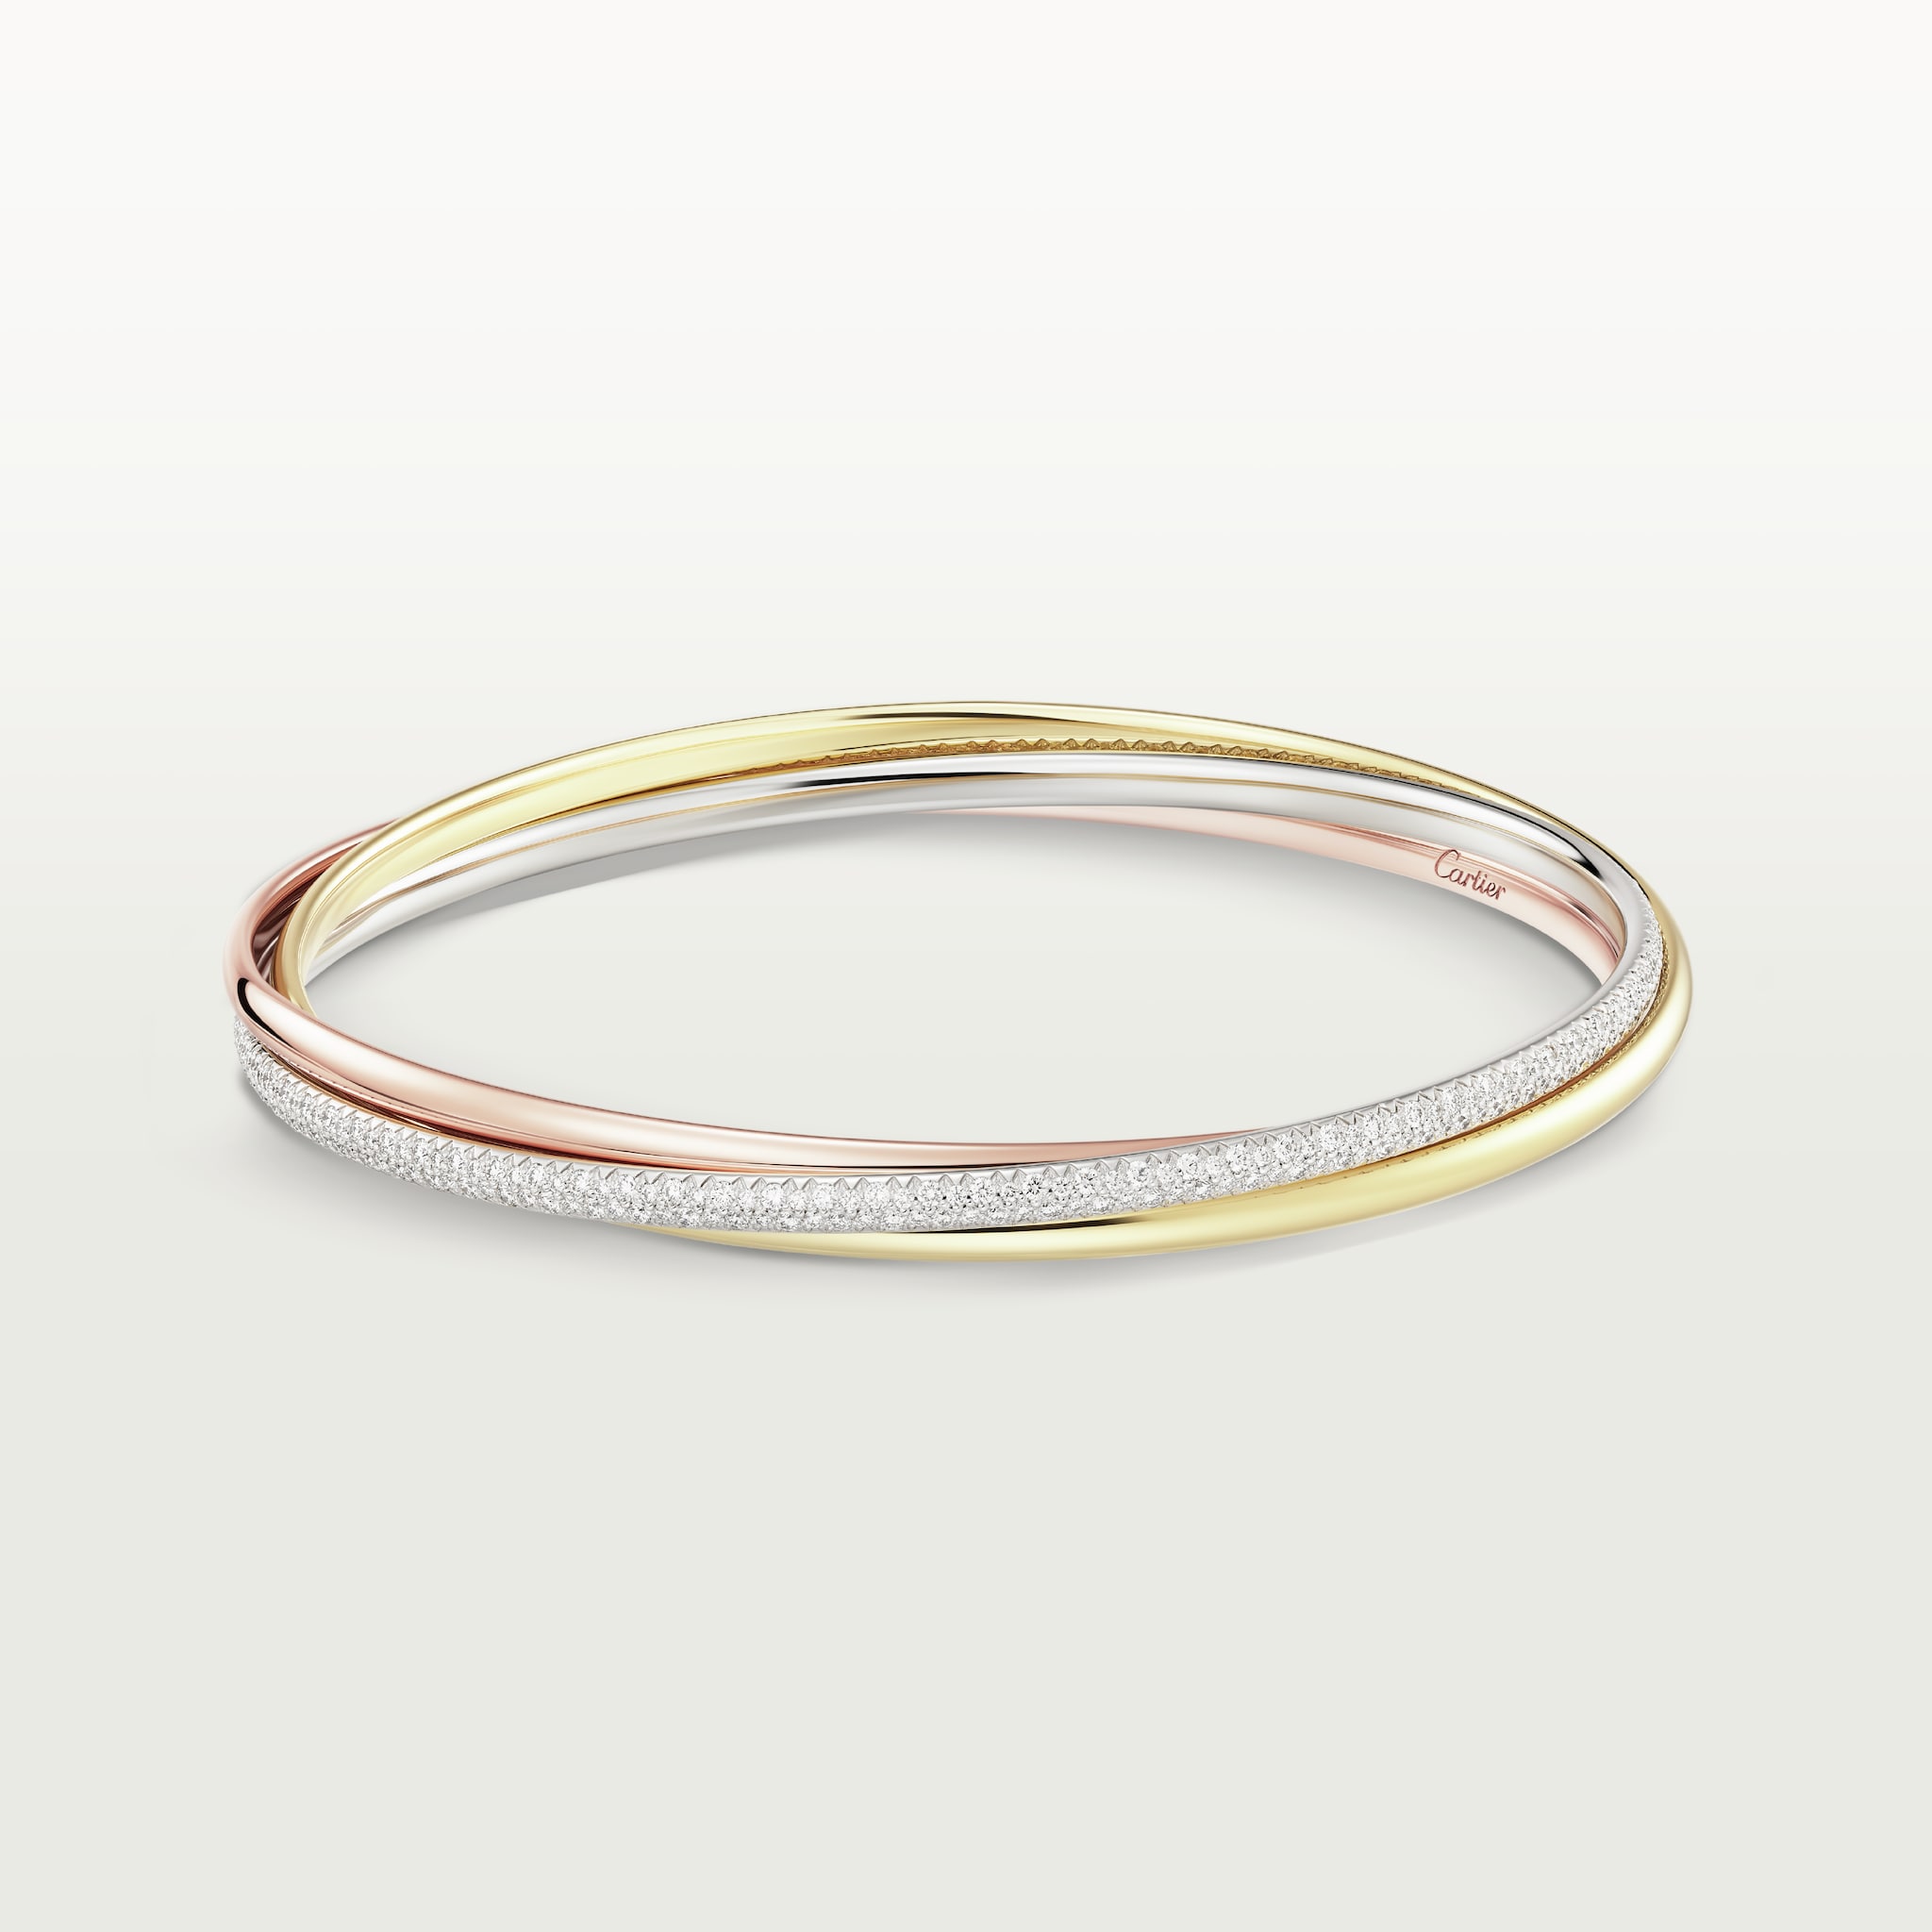 CRN6721317 - Trinity bracelet - White gold, yellow gold, rose gold 